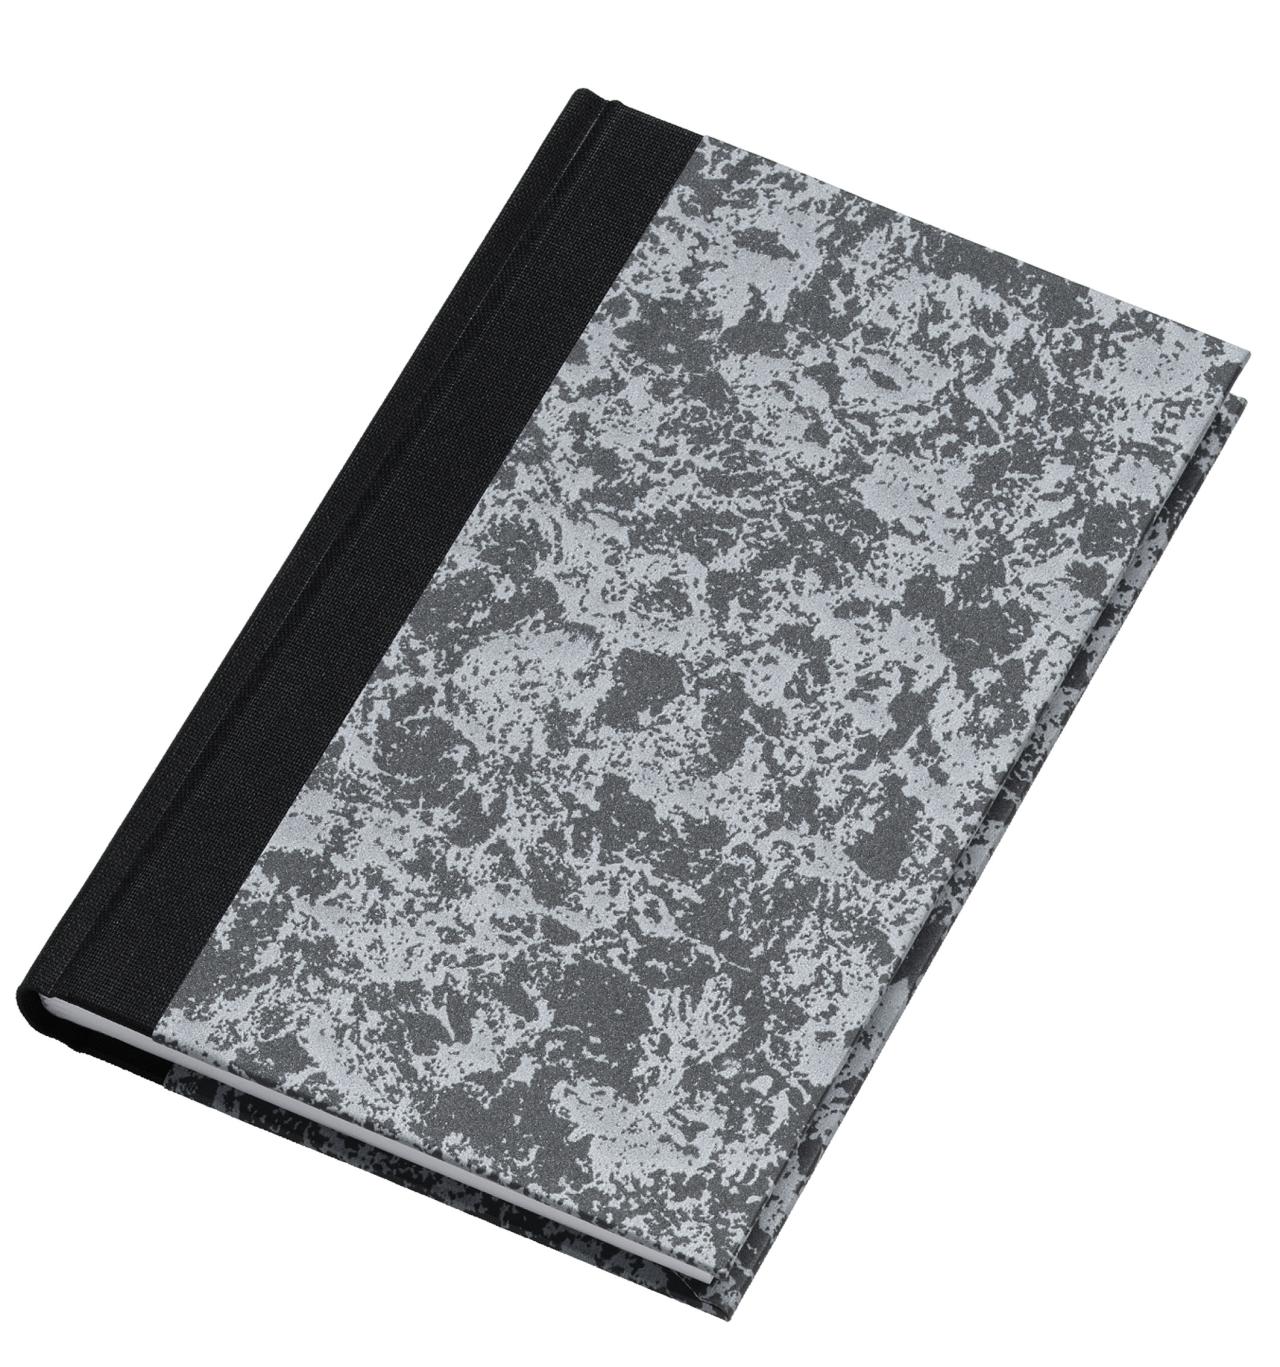 Atlanta Excellent Notebook, sewn, 330 x 205 mm, 96 pages